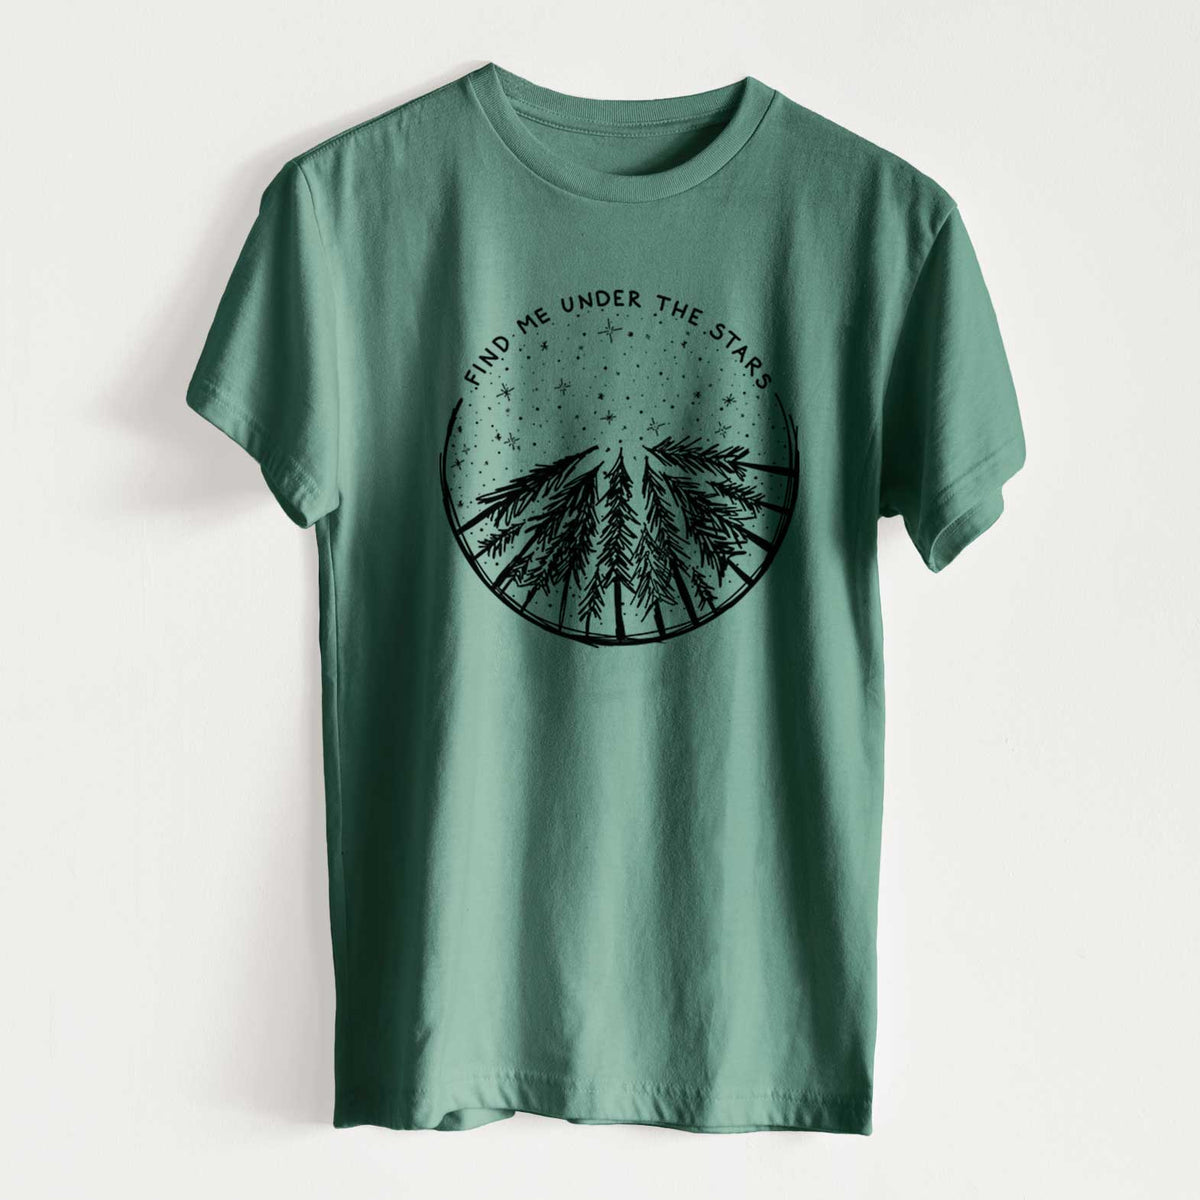 Find Me Under the Stars - Unisex Recycled Eco Tee  - CLOSEOUT - FINAL SALE